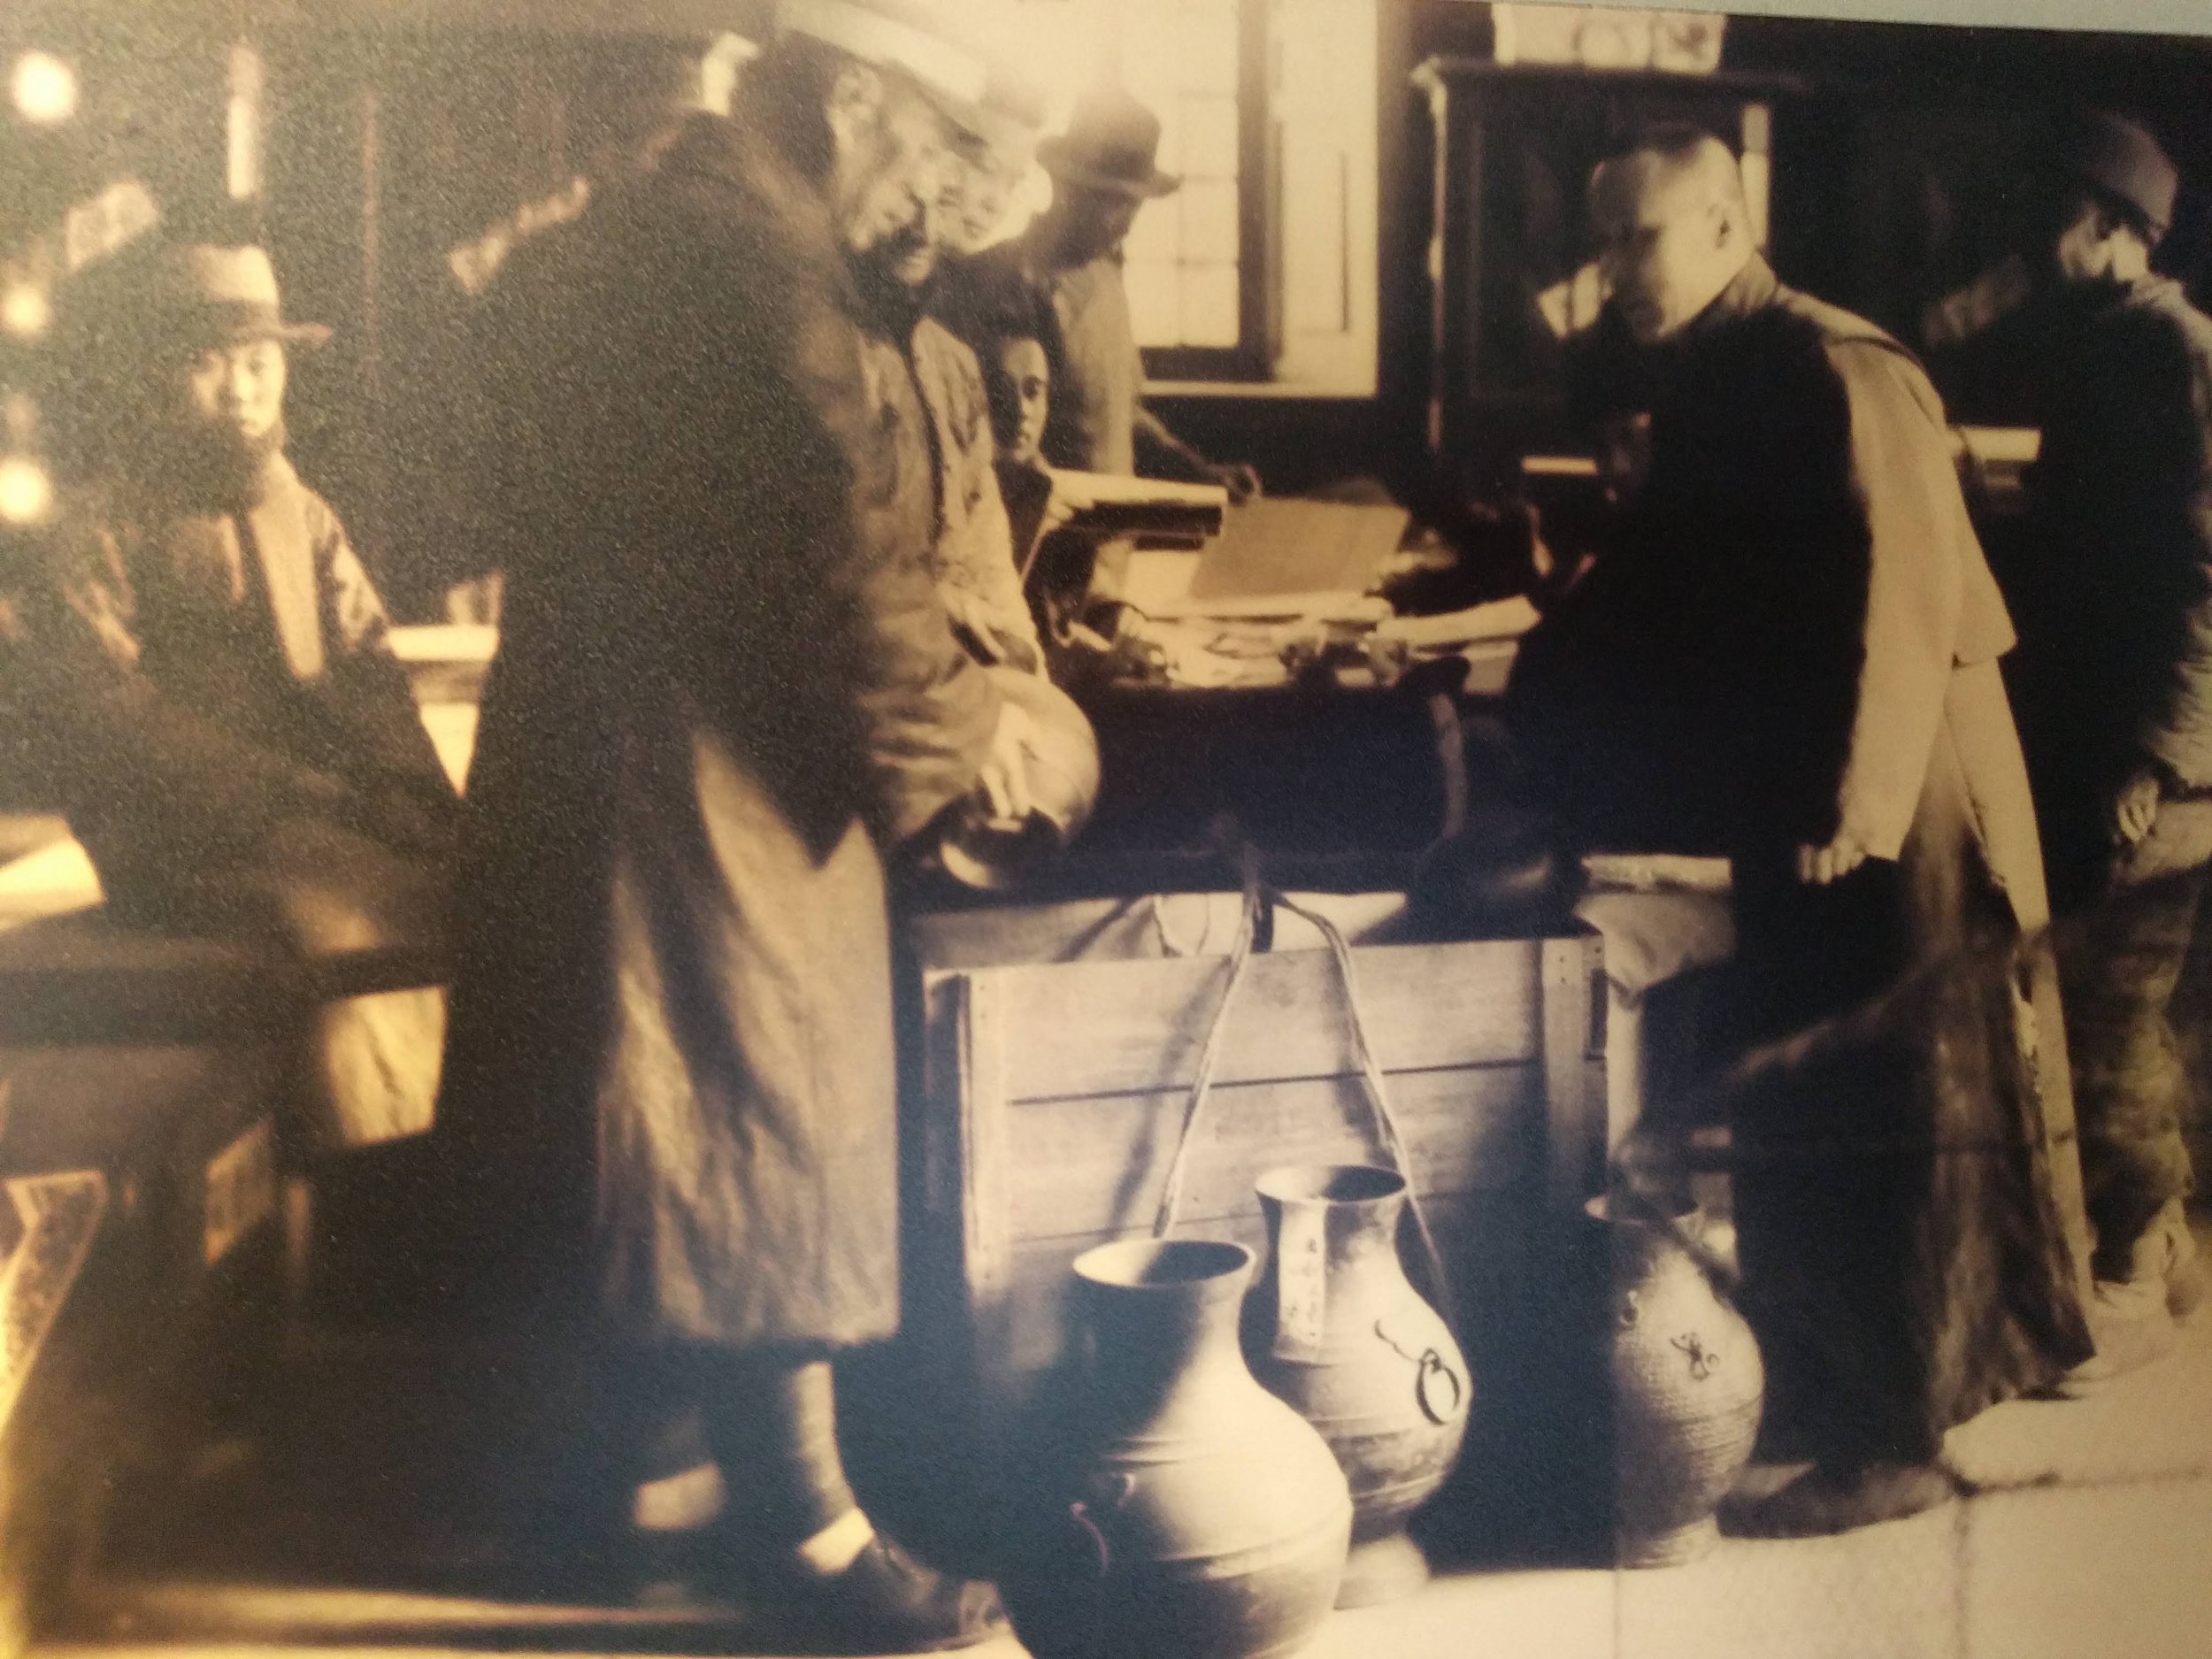  Palace Museum staff pack objects in wooden cases prior to evacuation from the Forbidden City, 1932.					  					  					  					  					 